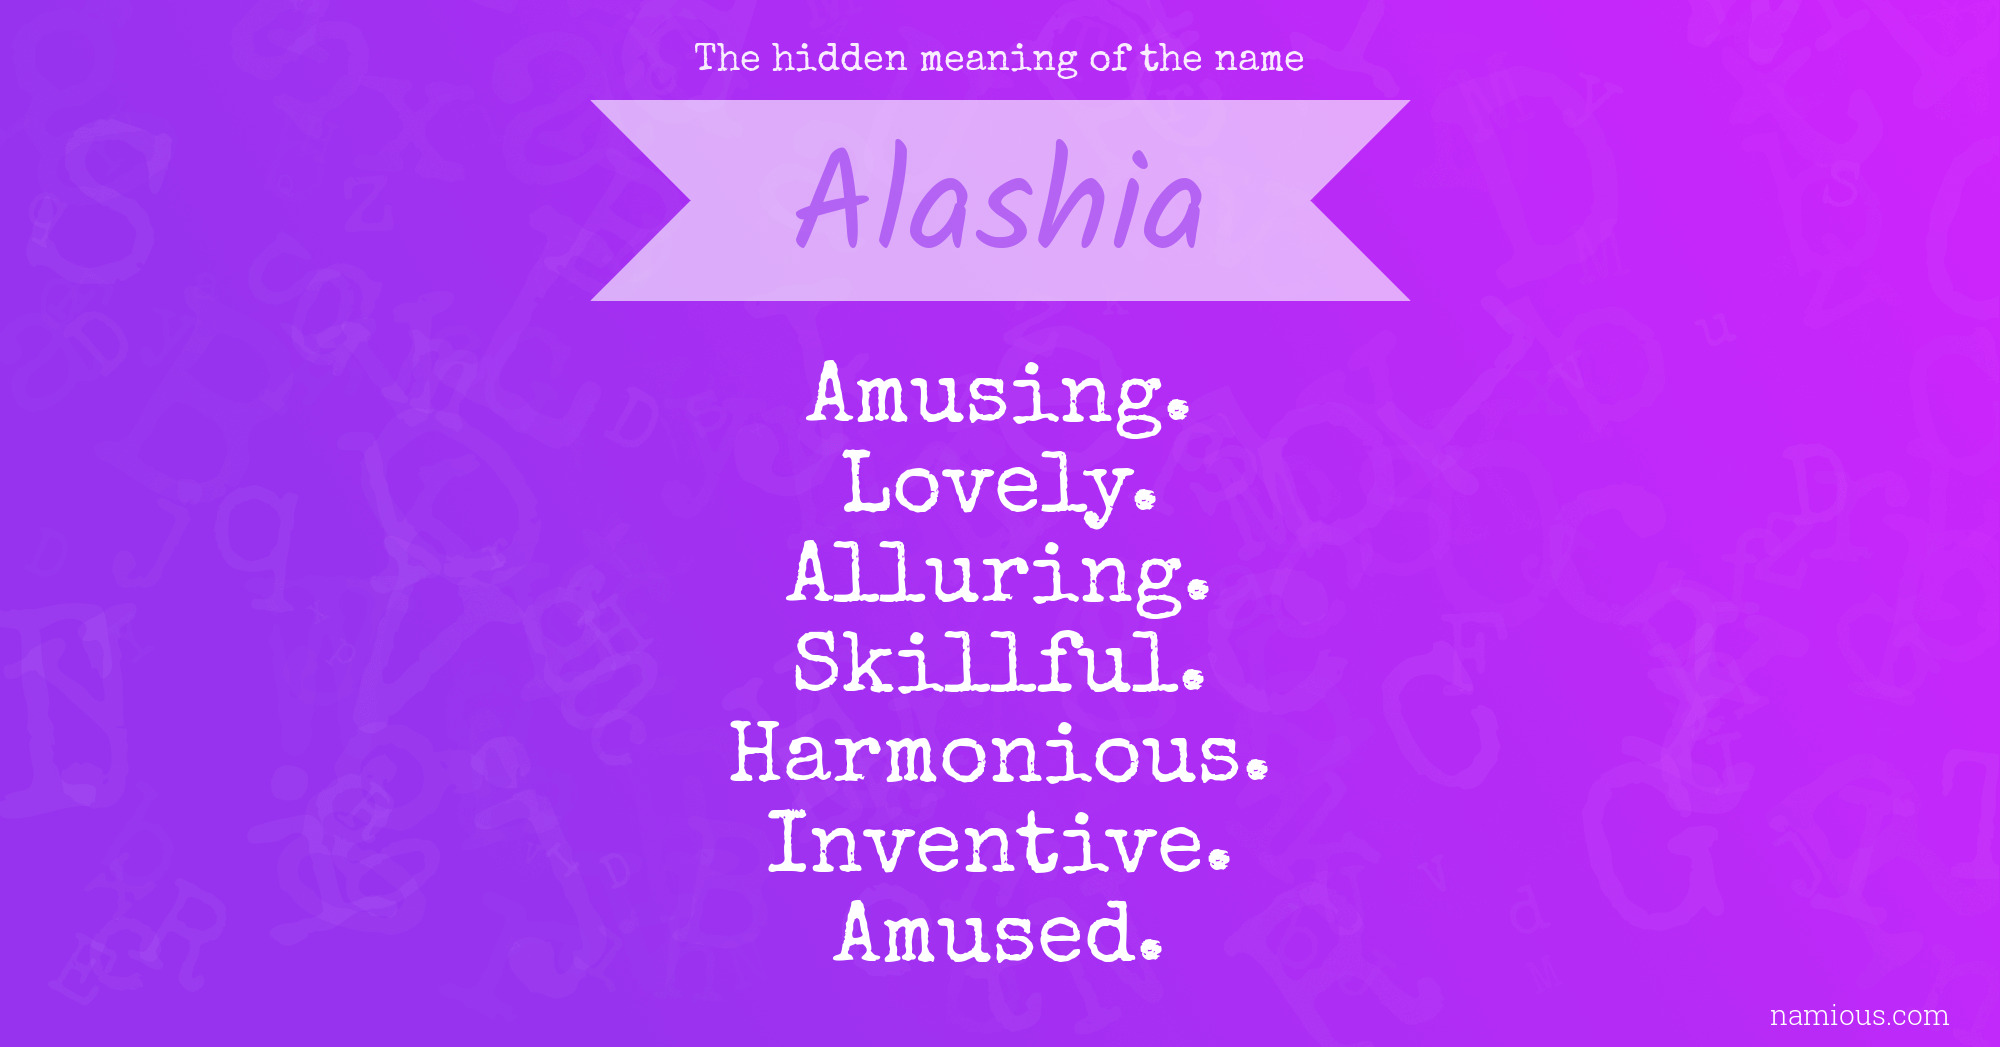 The hidden meaning of the name Alashia